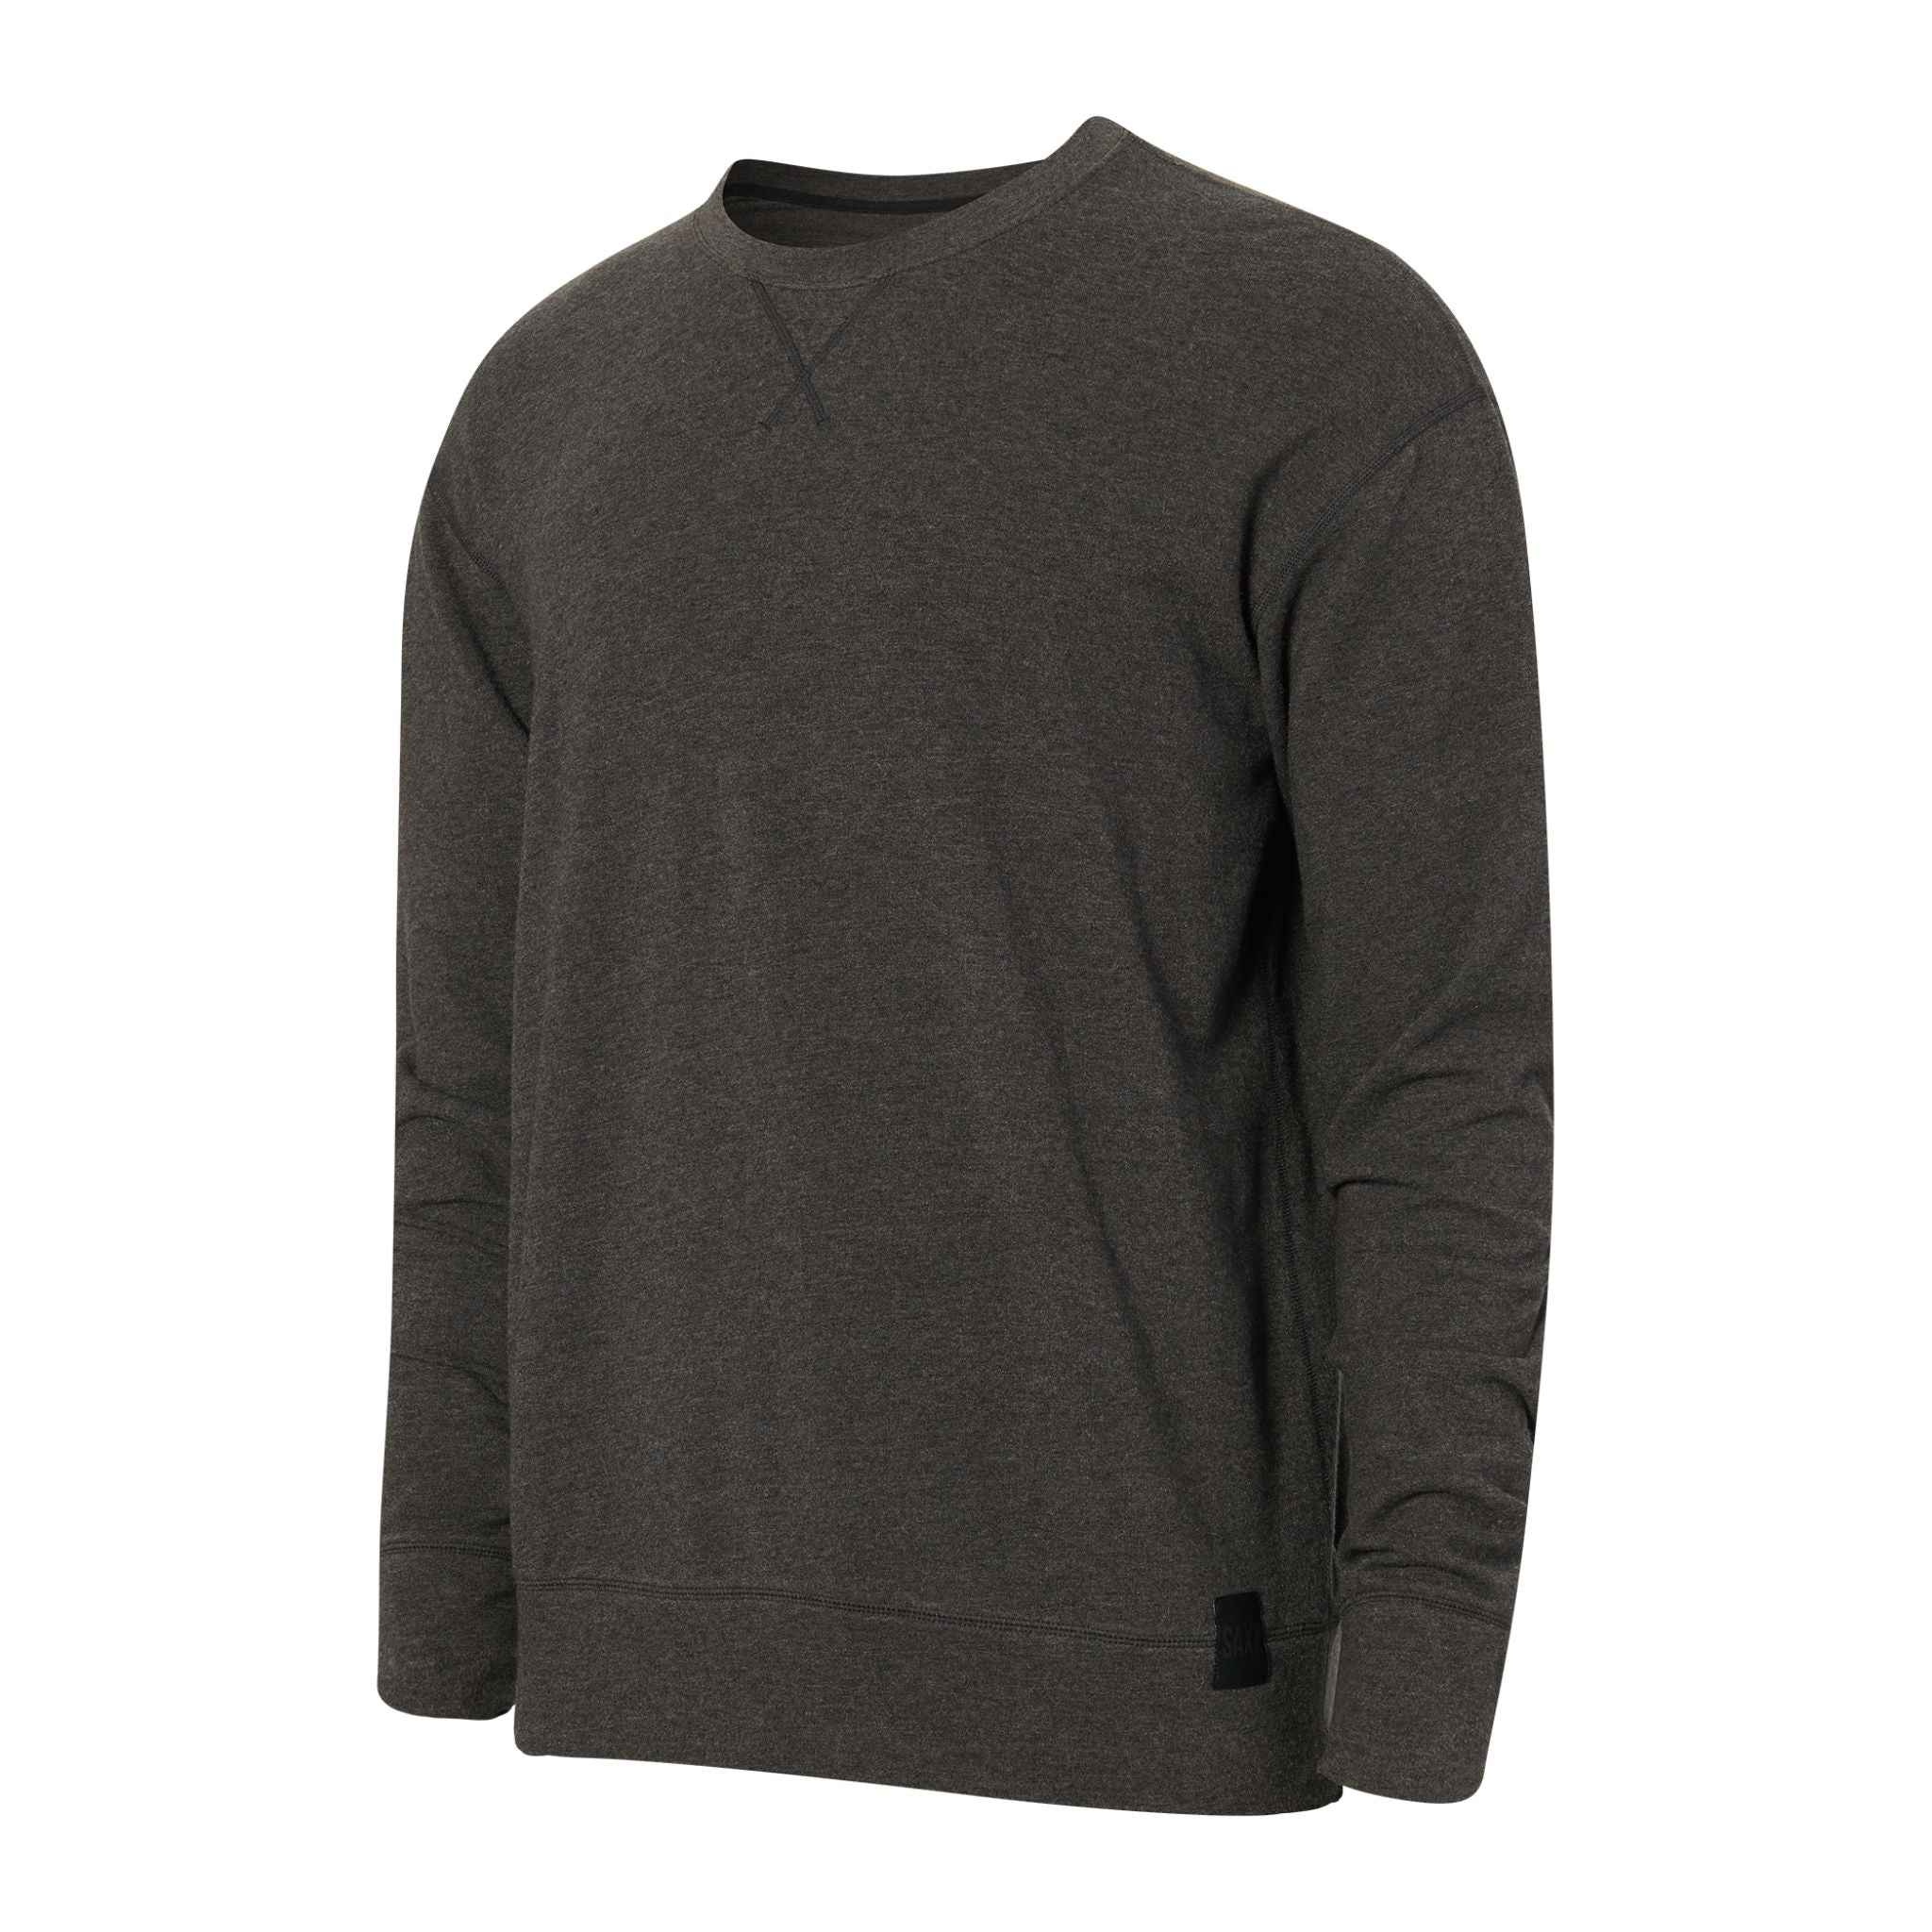 What better way to round out your weekend than with the 3Six Five Long Sleeve Crew? SAXX have used a super-soft cotton/Modal peached baby French terry blend and crafted something you won't ever want to take off. Prepare to unlock a level of comfort you didn't know existed.